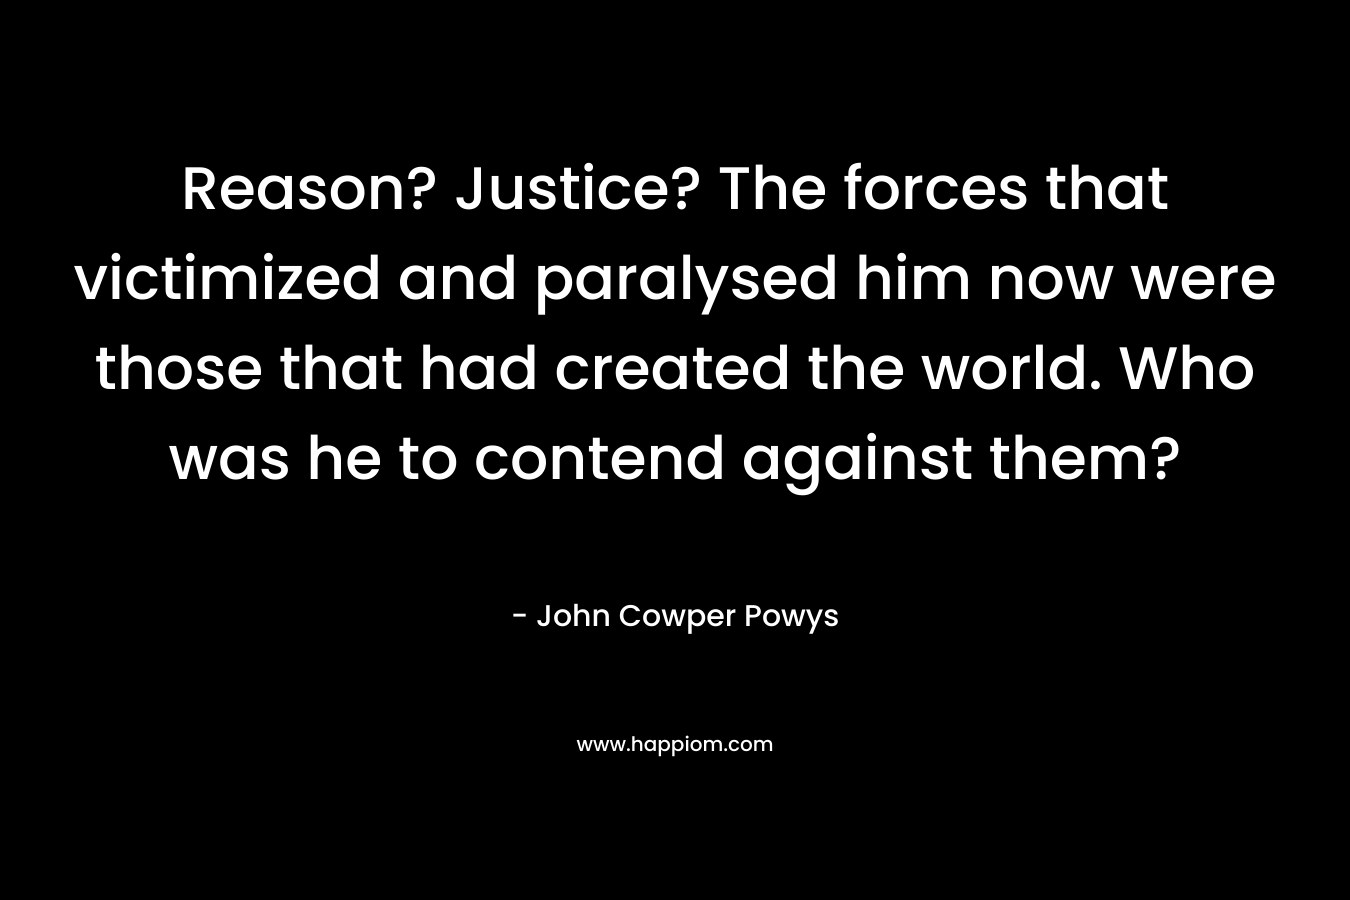 Reason? Justice? The forces that victimized and paralysed him now were those that had created the world. Who was he to contend against them?